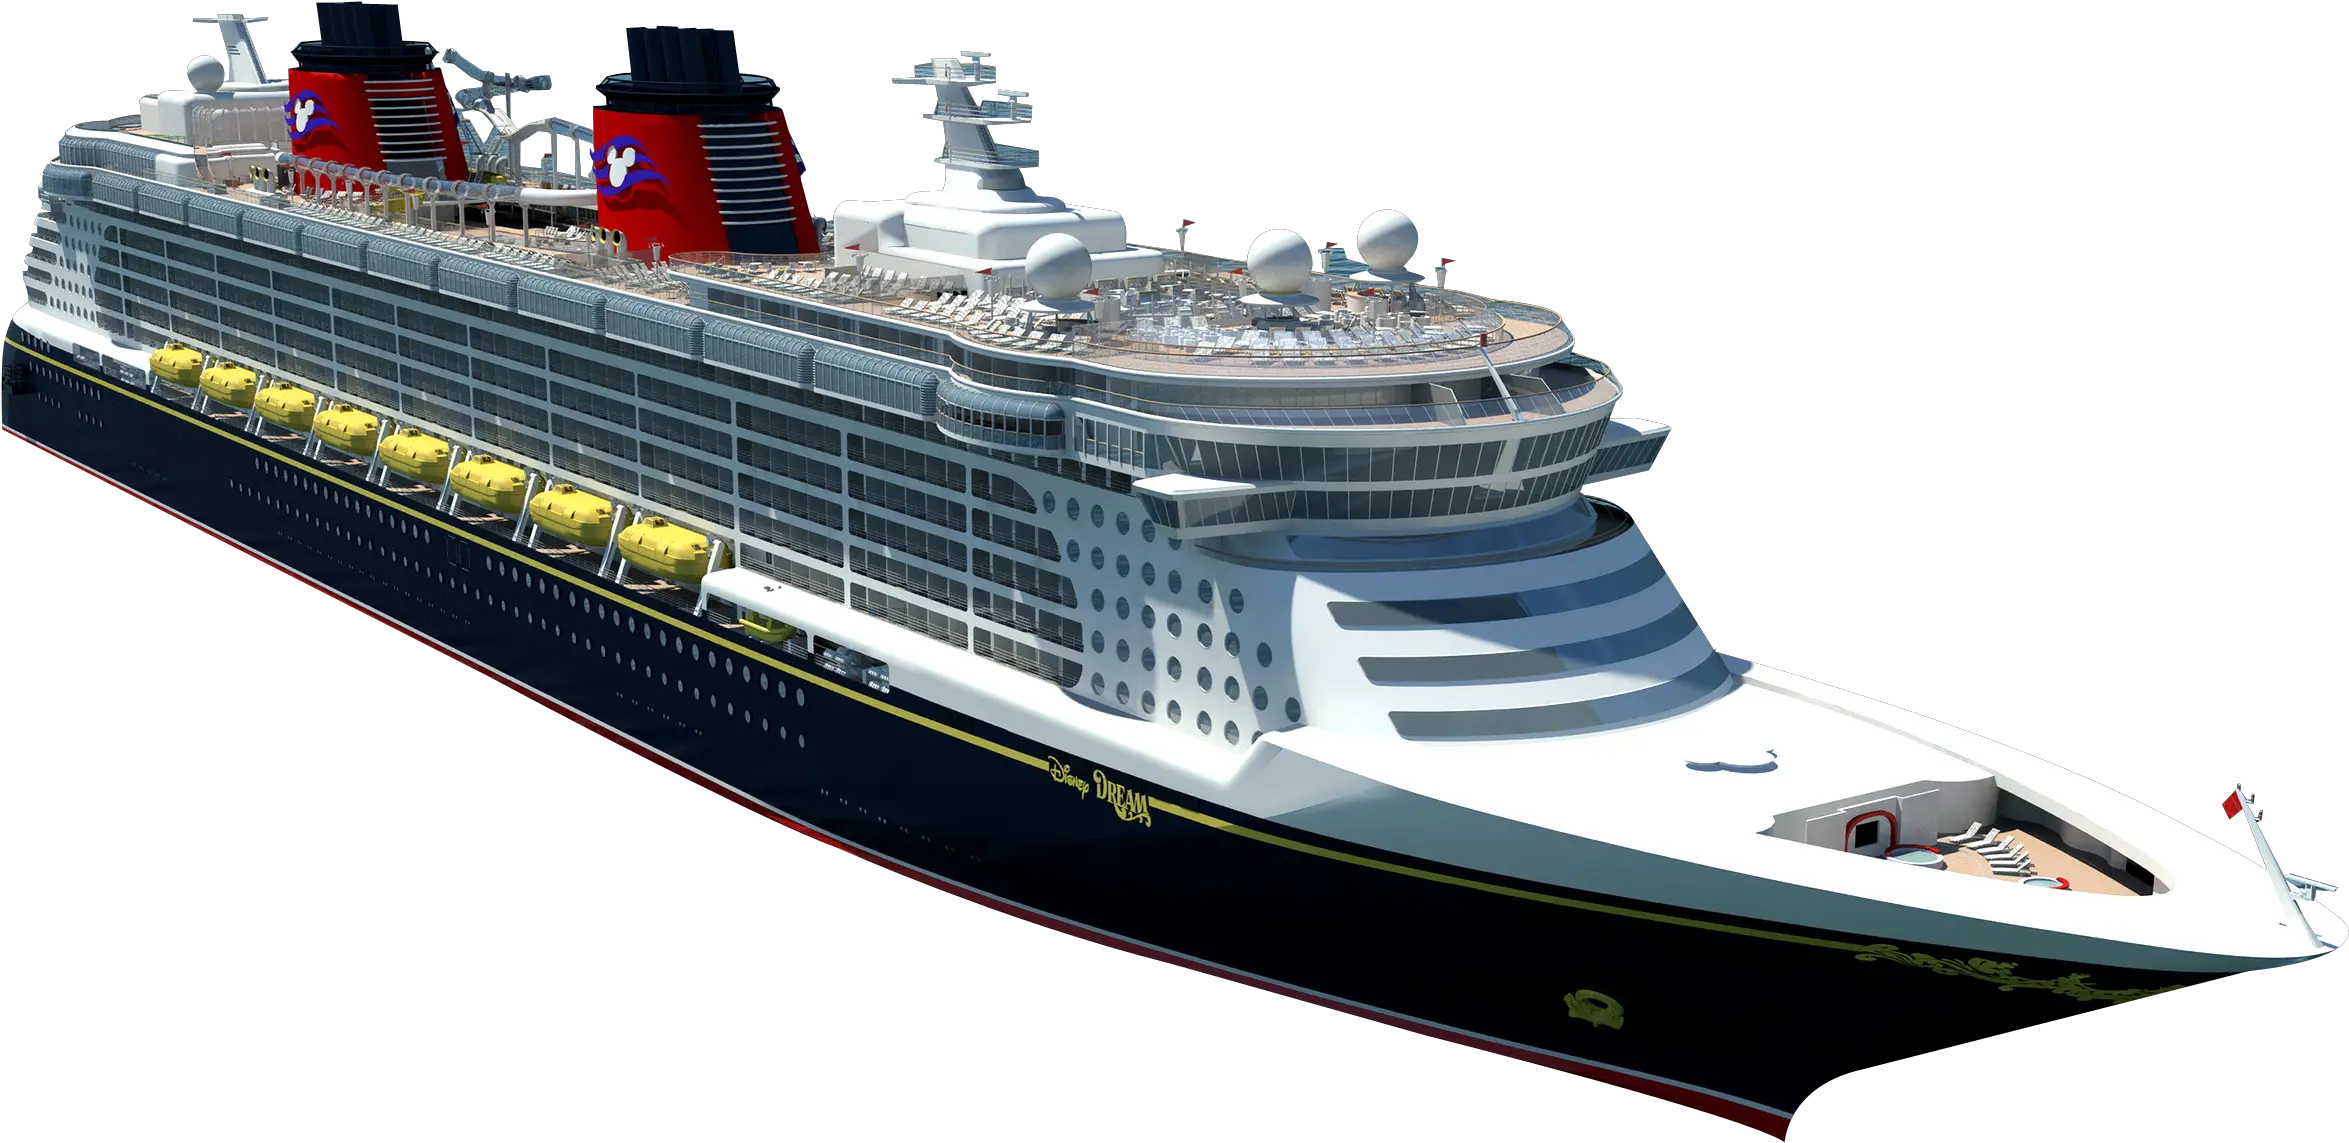 Download Cruise Ship Png Image For Free Disney Dream Cruise Ship Boat Png